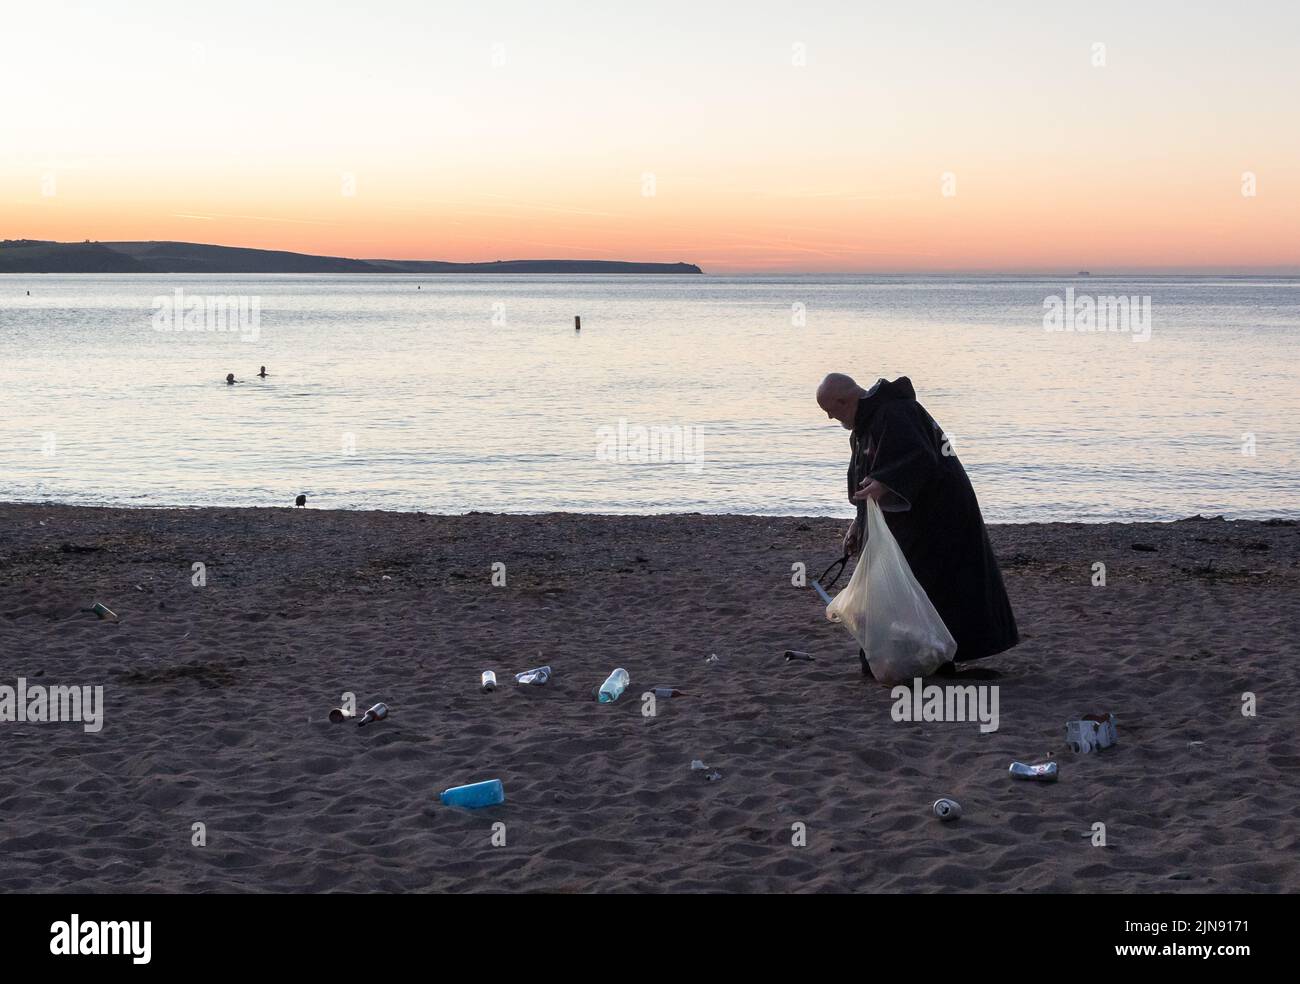 Myrtleville, Cork, Ireland. 10th August, 2022. Before sunrise the Very Rev. Patrick Stevenson, Parish Priest of St. Brigid’s Church Crosshaven walks along the strand collecting bottles, cans and other rubbish which have been discarded  by visitors to Myrtleville beach, Co. Cork, Ireland.  - Credit; David Creedon / Alamy Live News Stock Photo